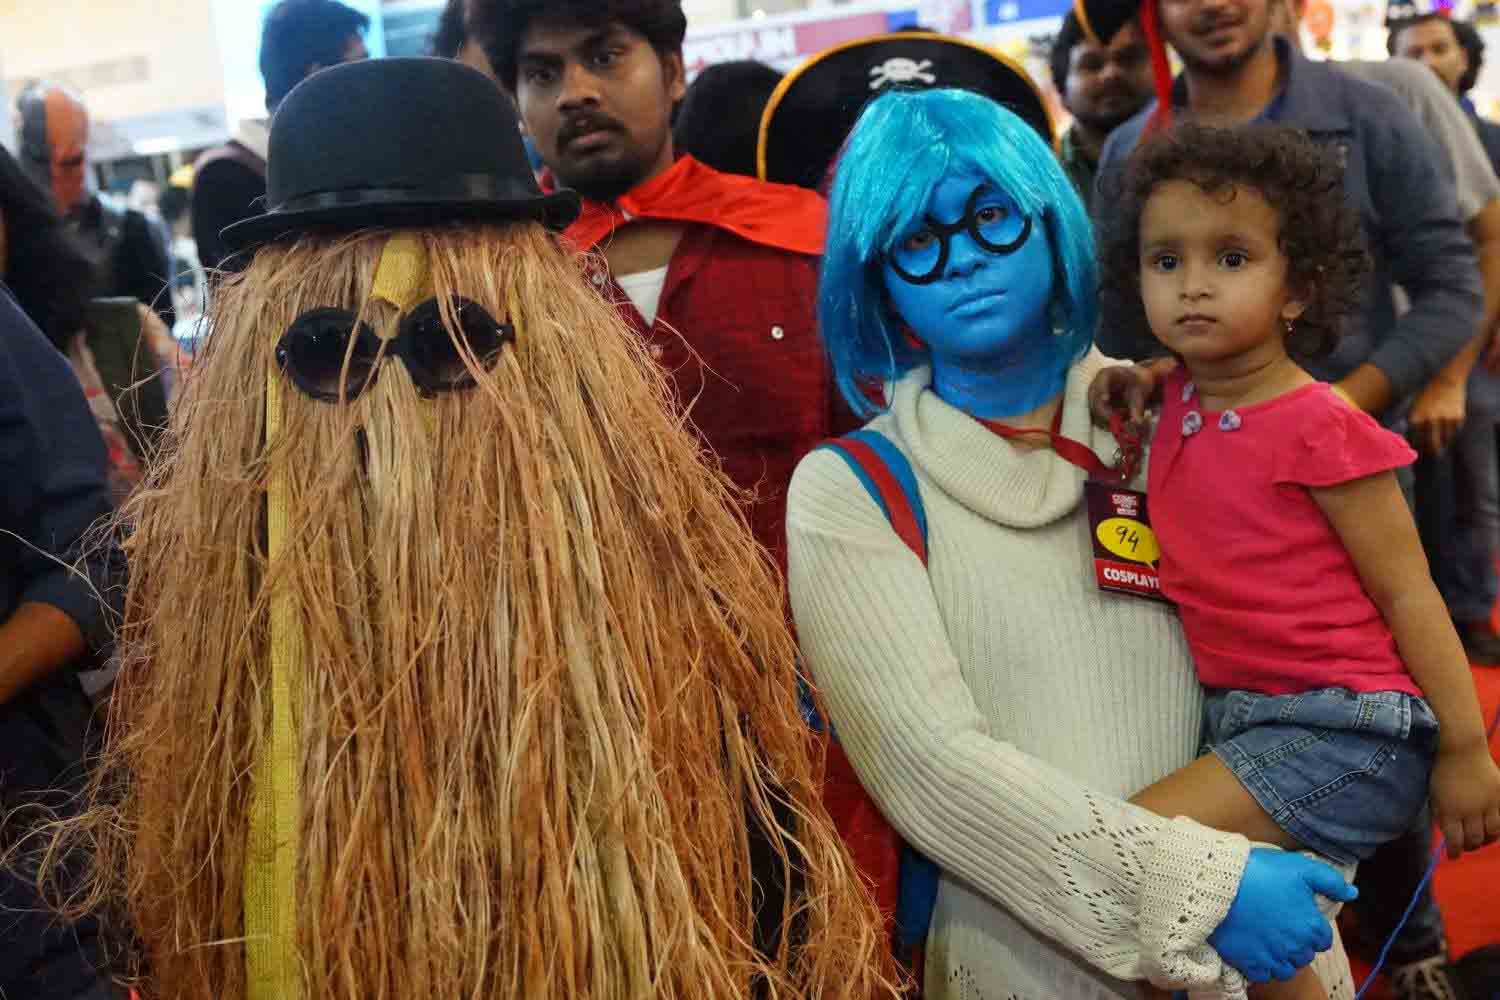 cosplayer comic con express pune events pune